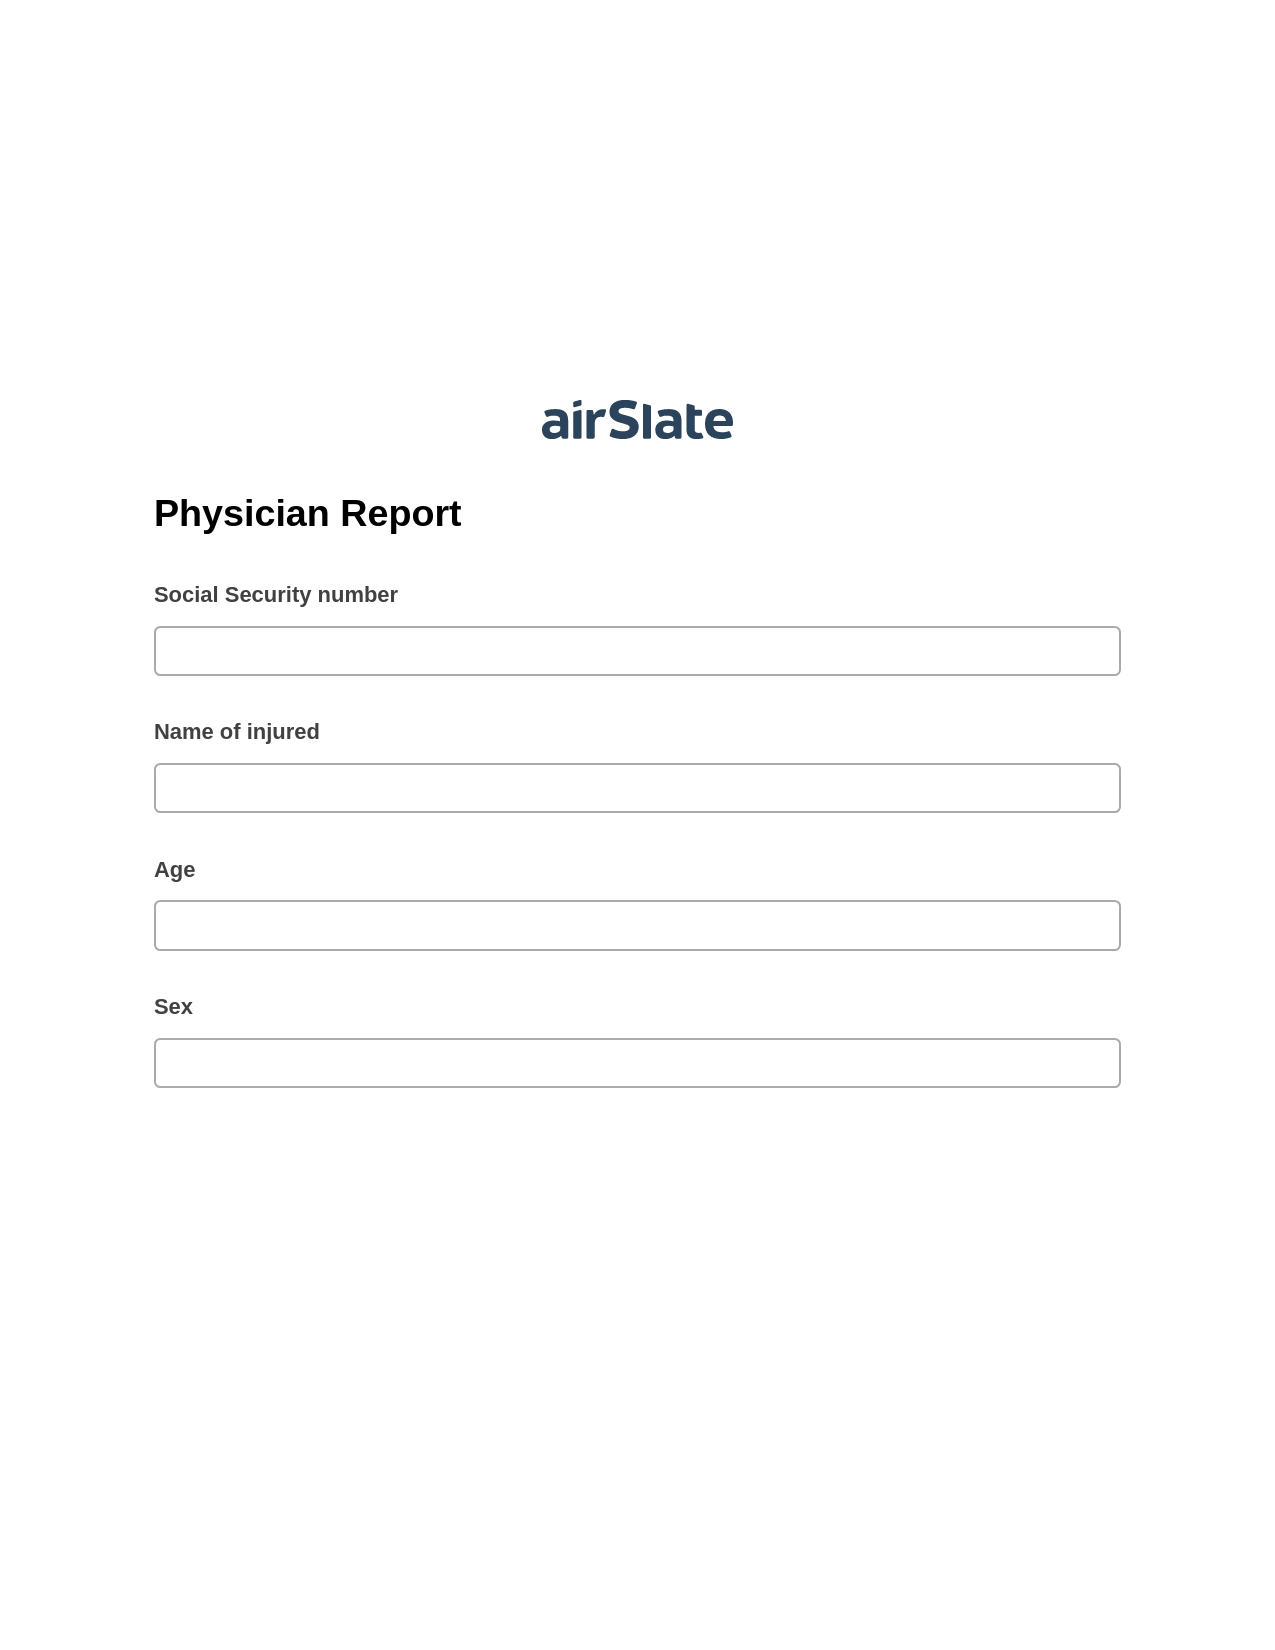 Multirole Physician Report Pre-fill Dropdowns from Airtable, Create NetSuite Record bot, Archive to Google Drive Bot